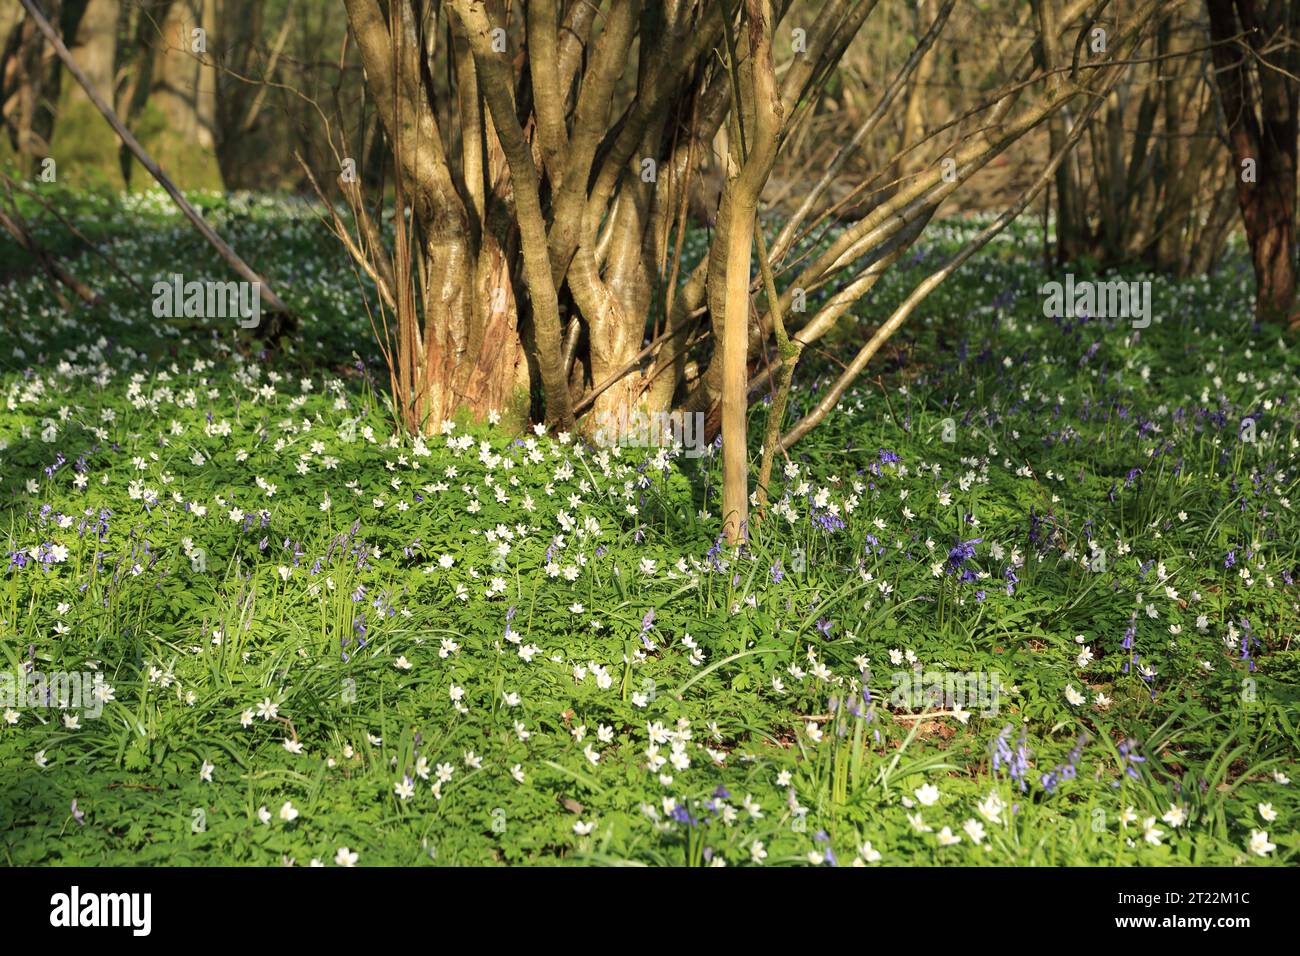 Wood anemone and bluebell wildflowers in ancient woodland on the North Downs at Spong Wood, Elmsted, Ashford, Kent, England, United Kingdom Stock Photo